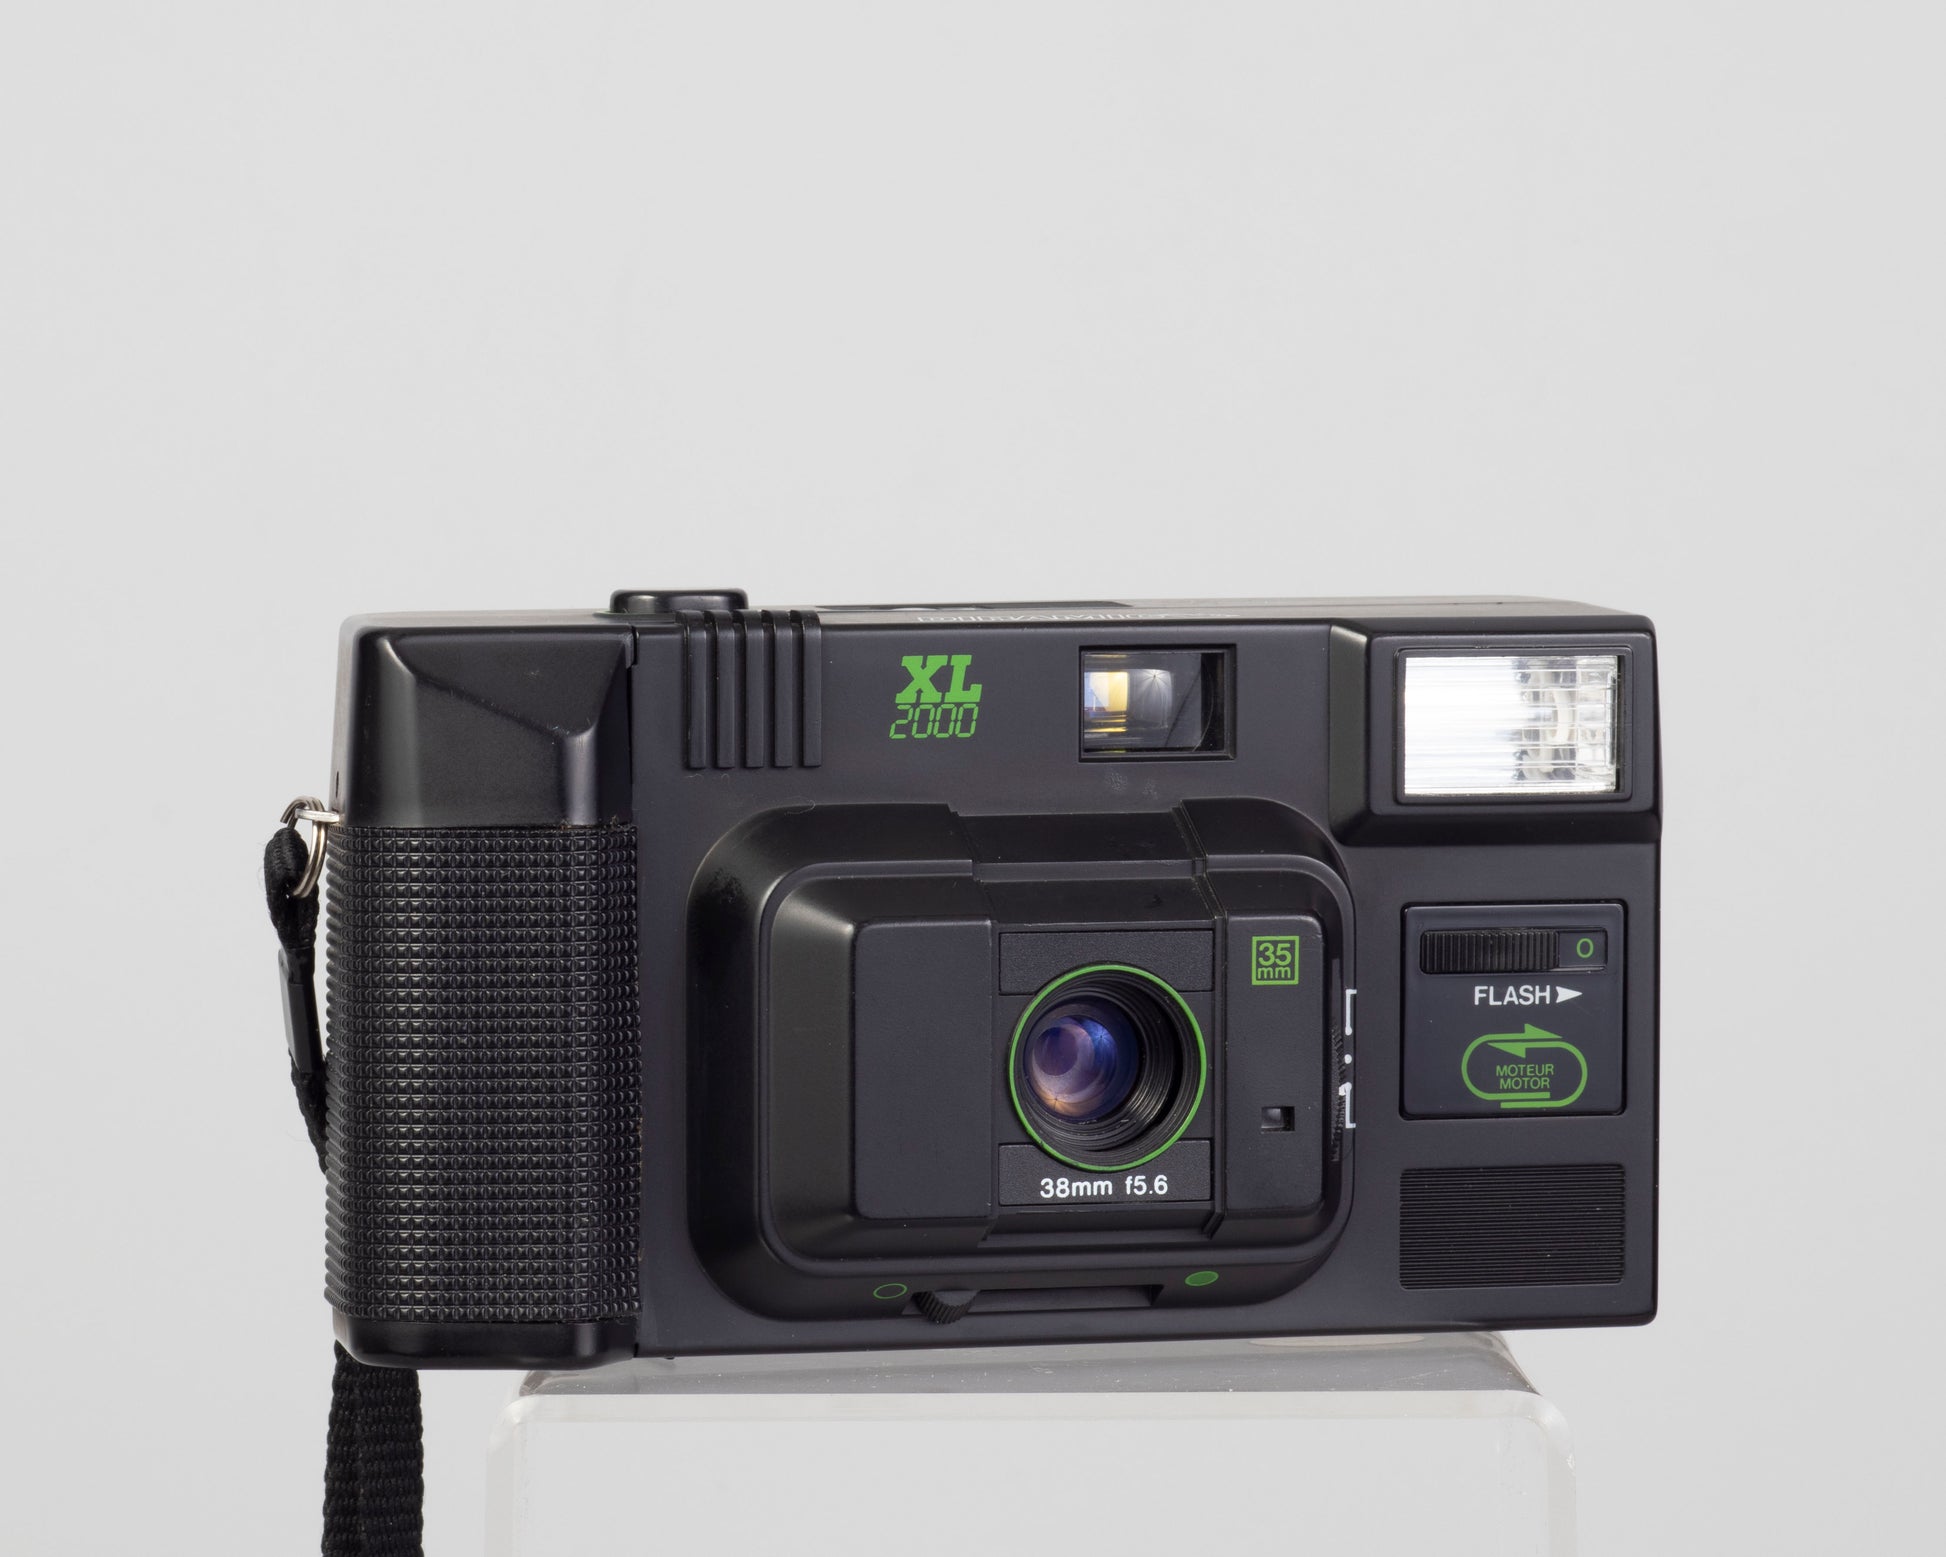 The Diramic XL 2000 is a simple but pleasant to use 35mm camera from the 1980s